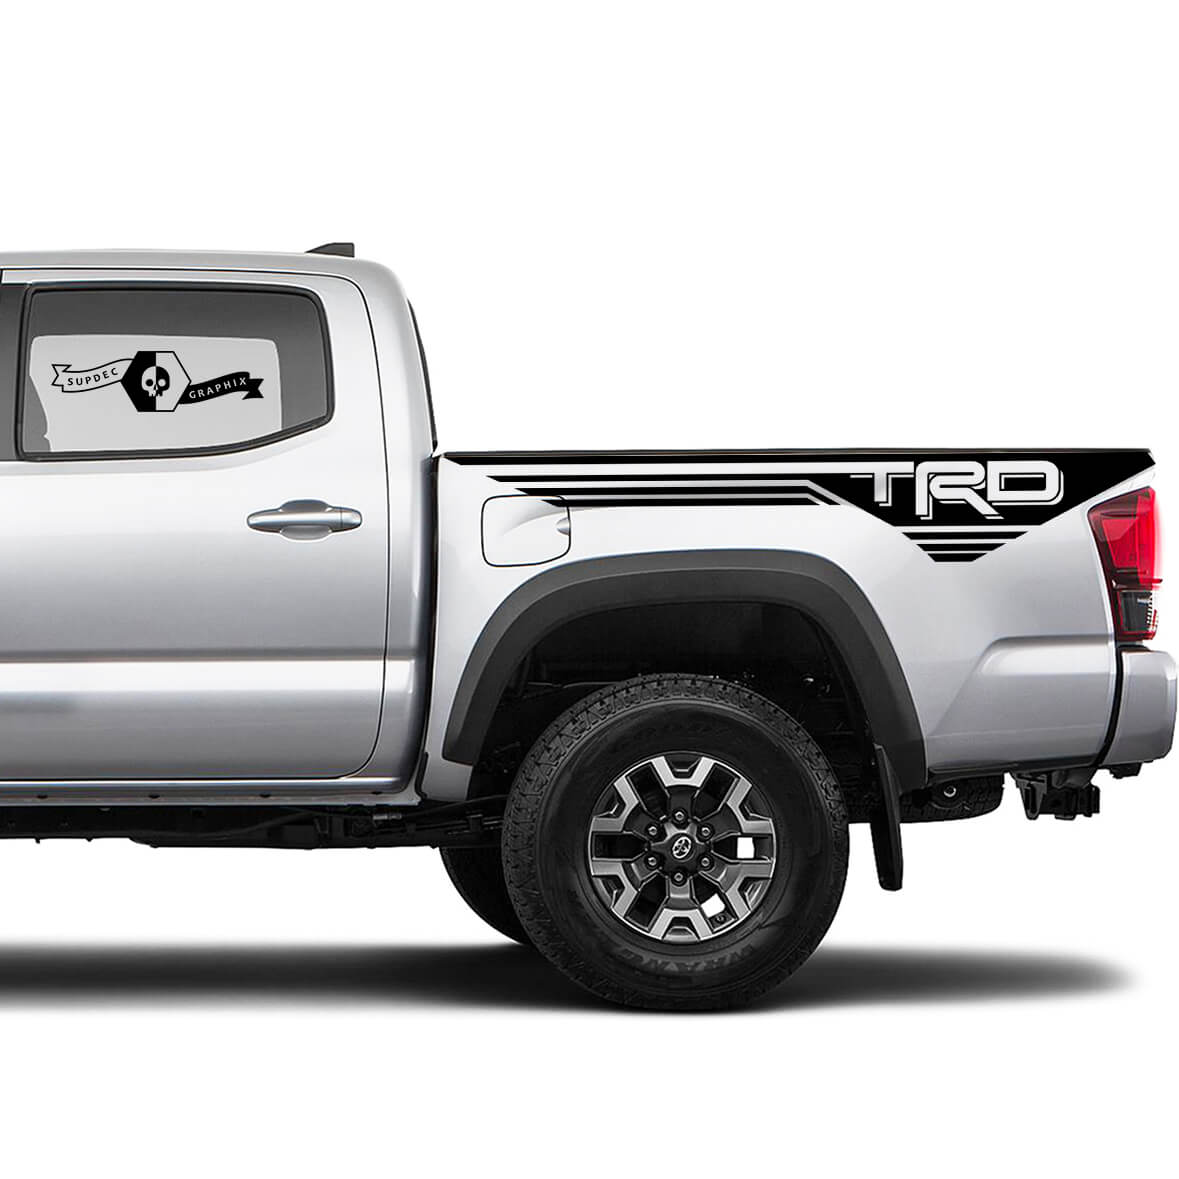 TRD 4x4 Off-Road Lines BedSide Side Vinyl Stickers Decal fit to Toyota Tacoma Tundra all years #22
